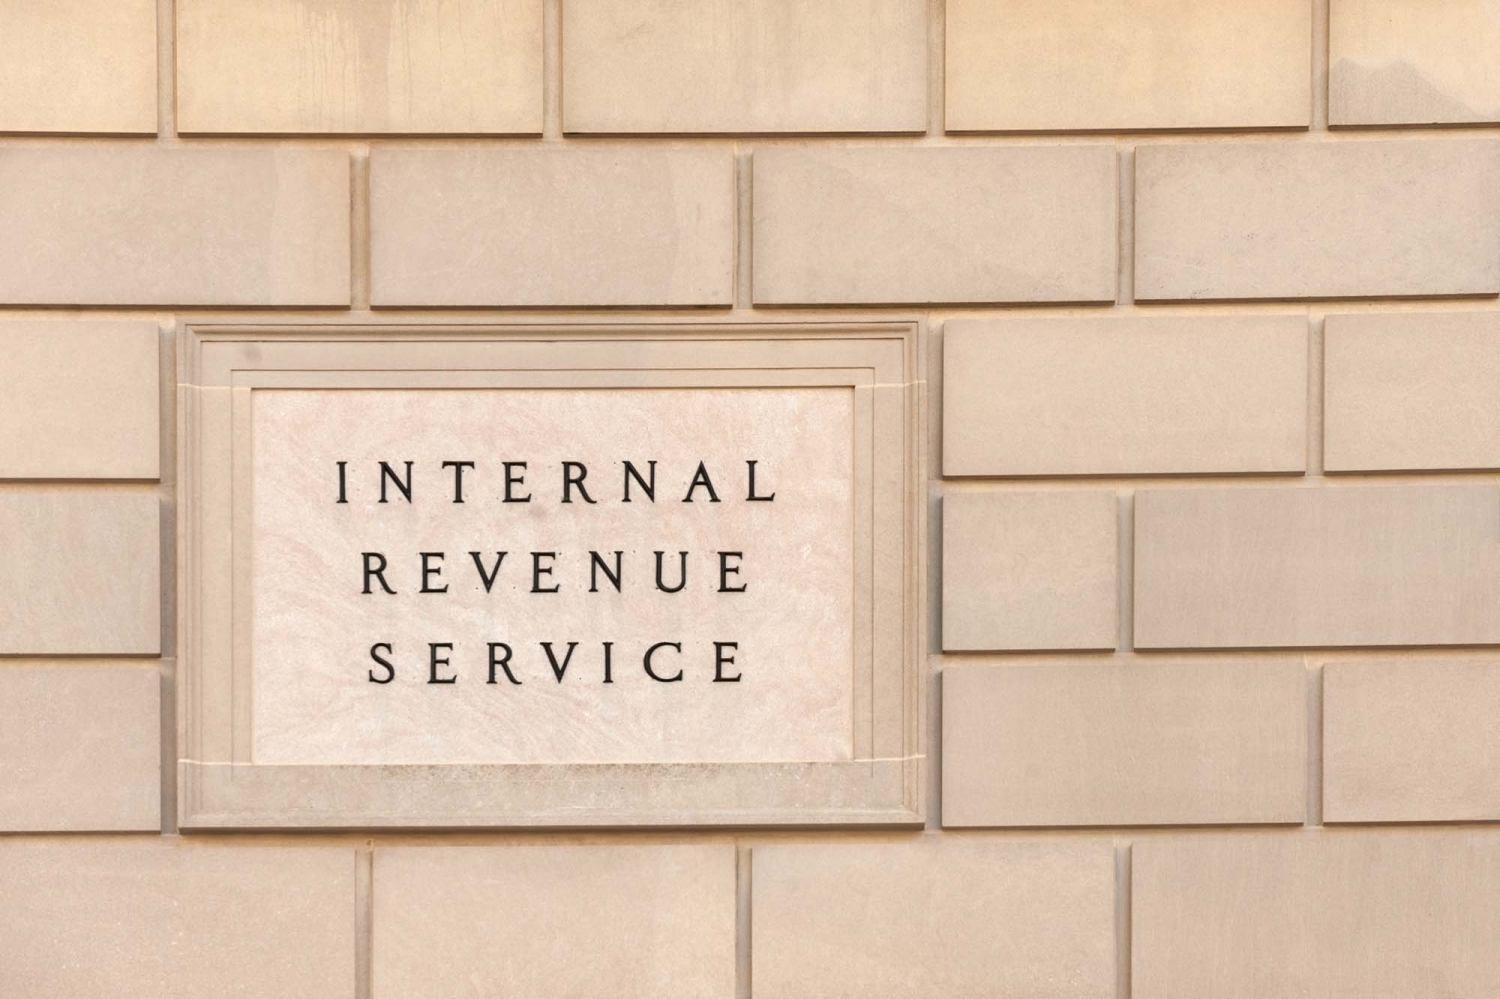 IRS Issues Guidance on Taxability of DCAP Benefits for 2021, 2022